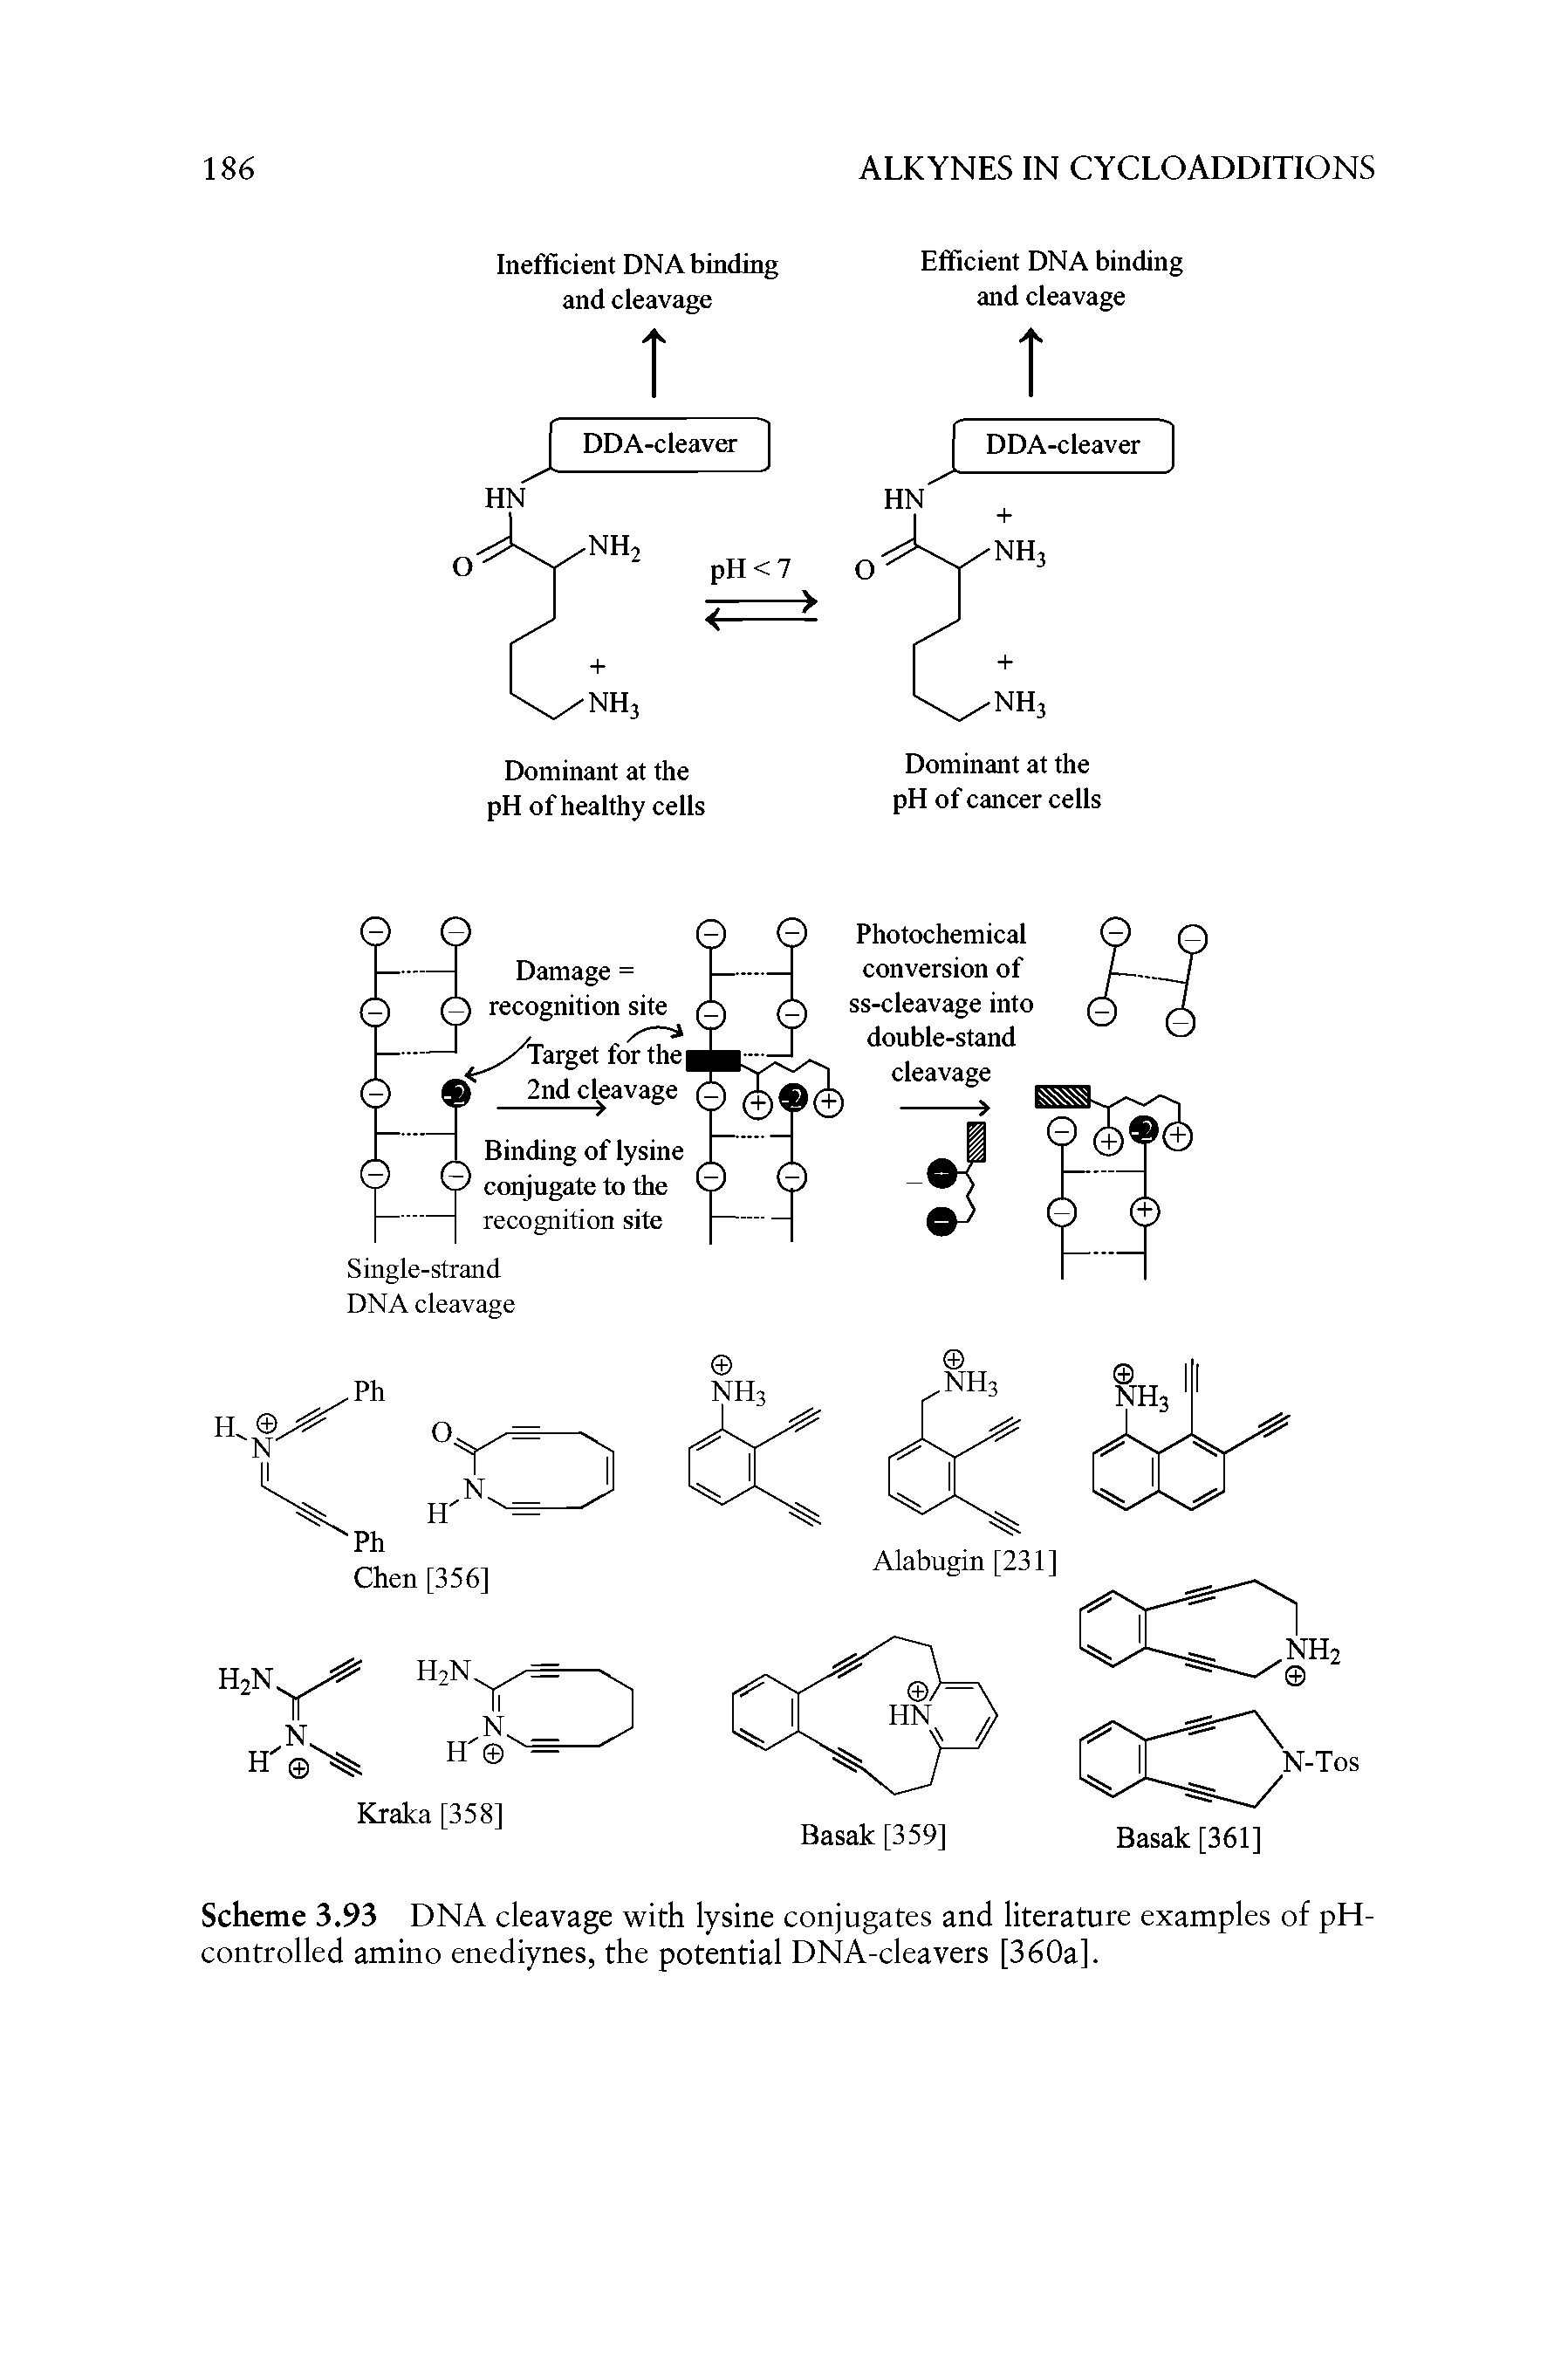 Scheme 3.93 DNA cleavage with lysine conjugates and literature examples of pH-controlled amino enediynes, the potential DNA-cleavers [360a].